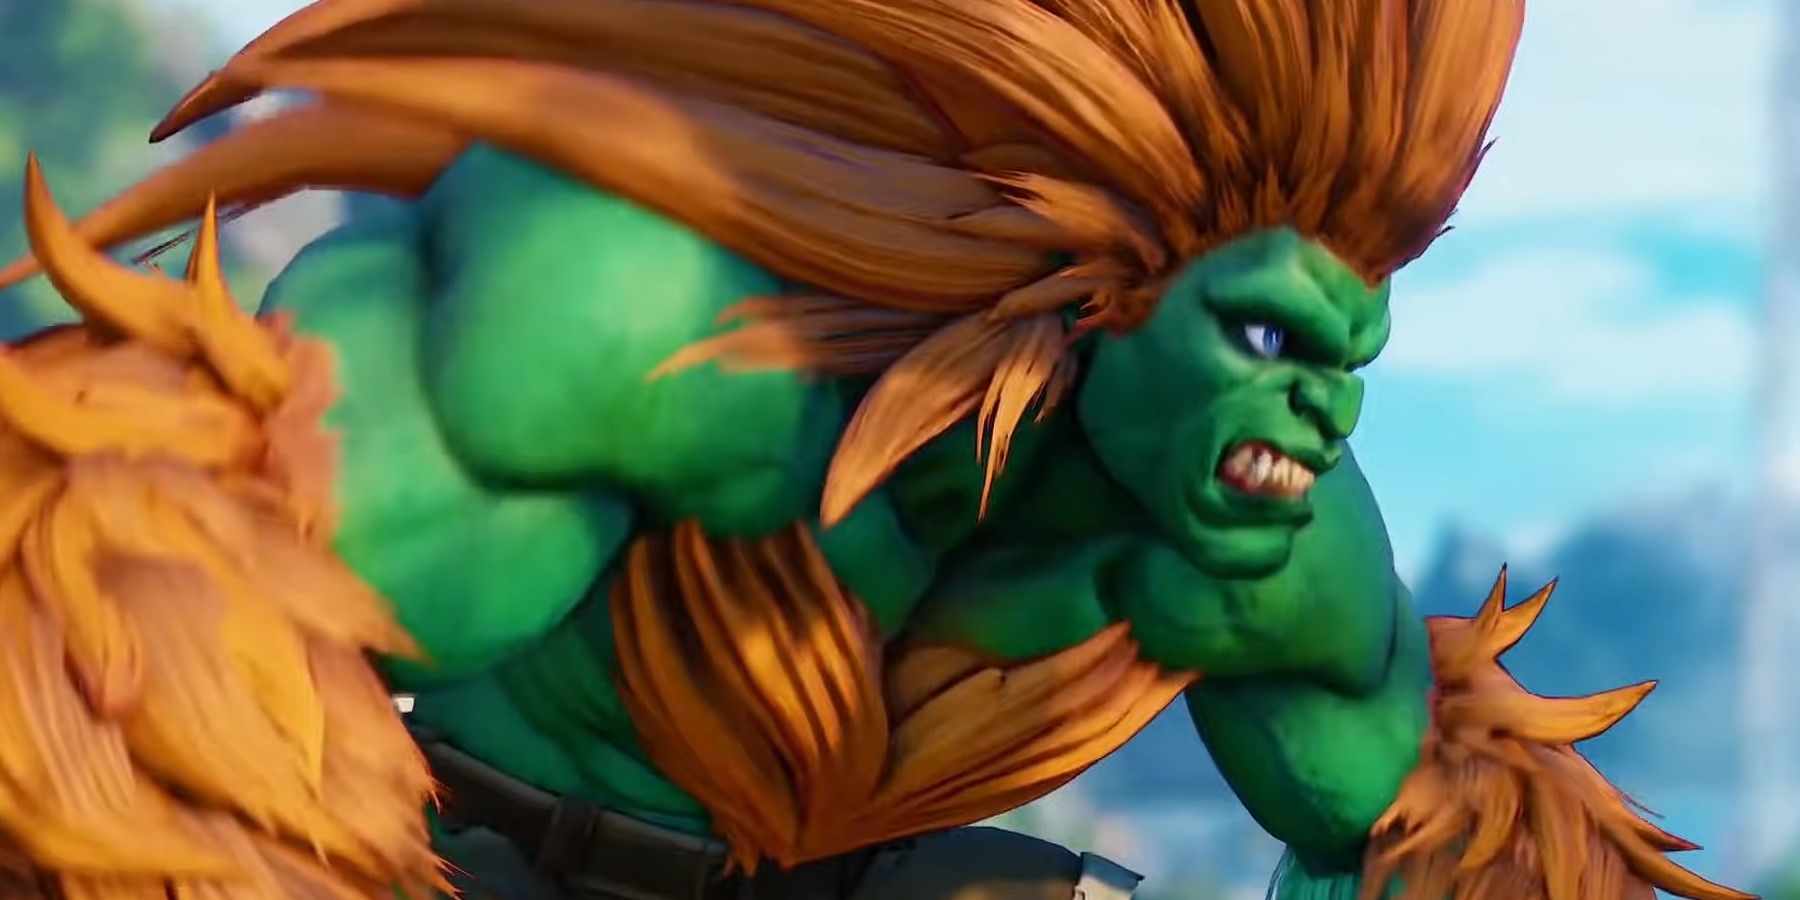 Blanka growling at his opponent